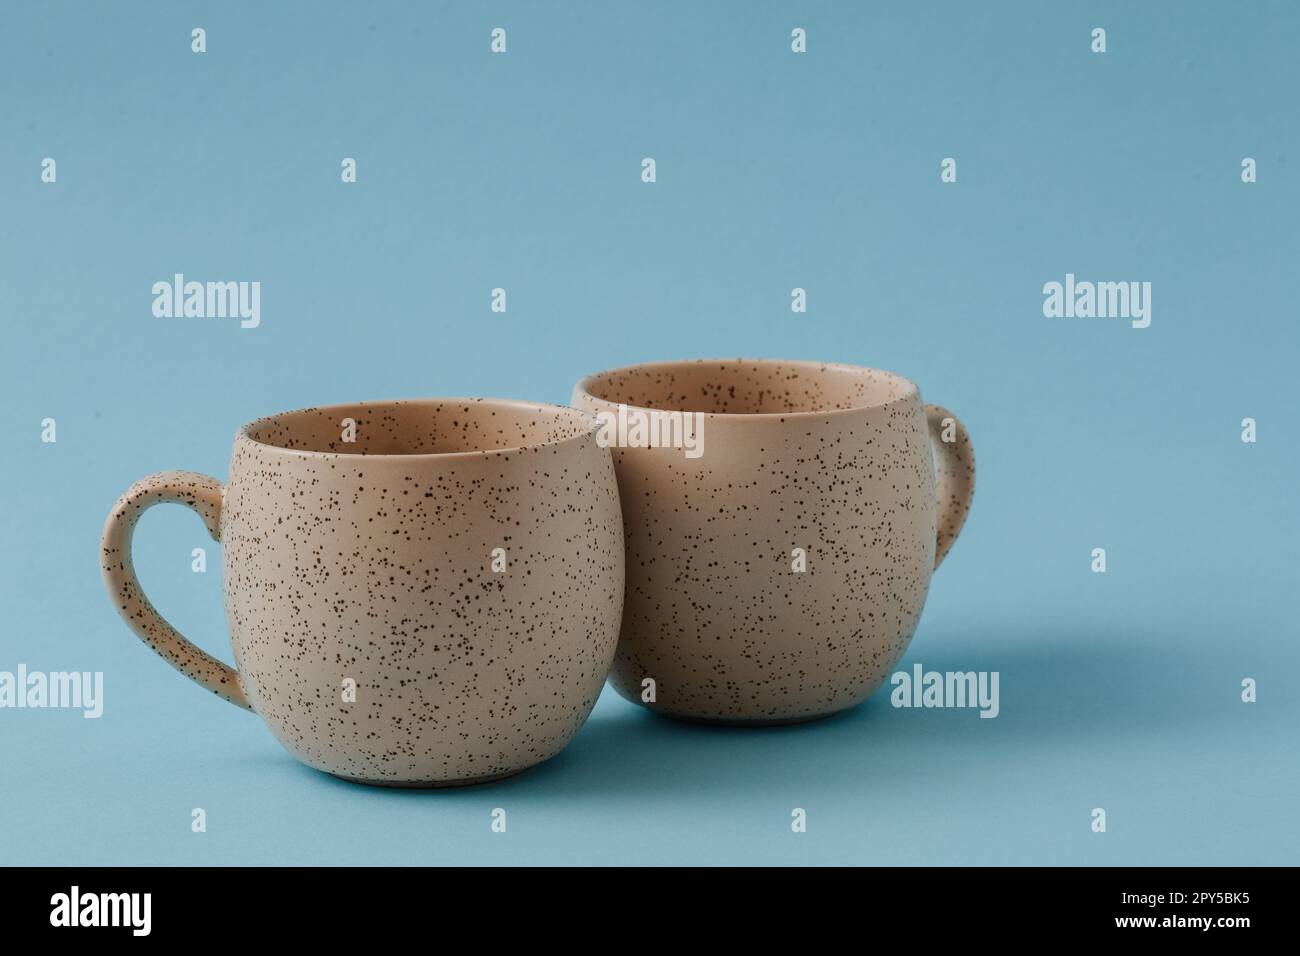 Two porcelain empty cups on a blue background, copy space Stock Photo